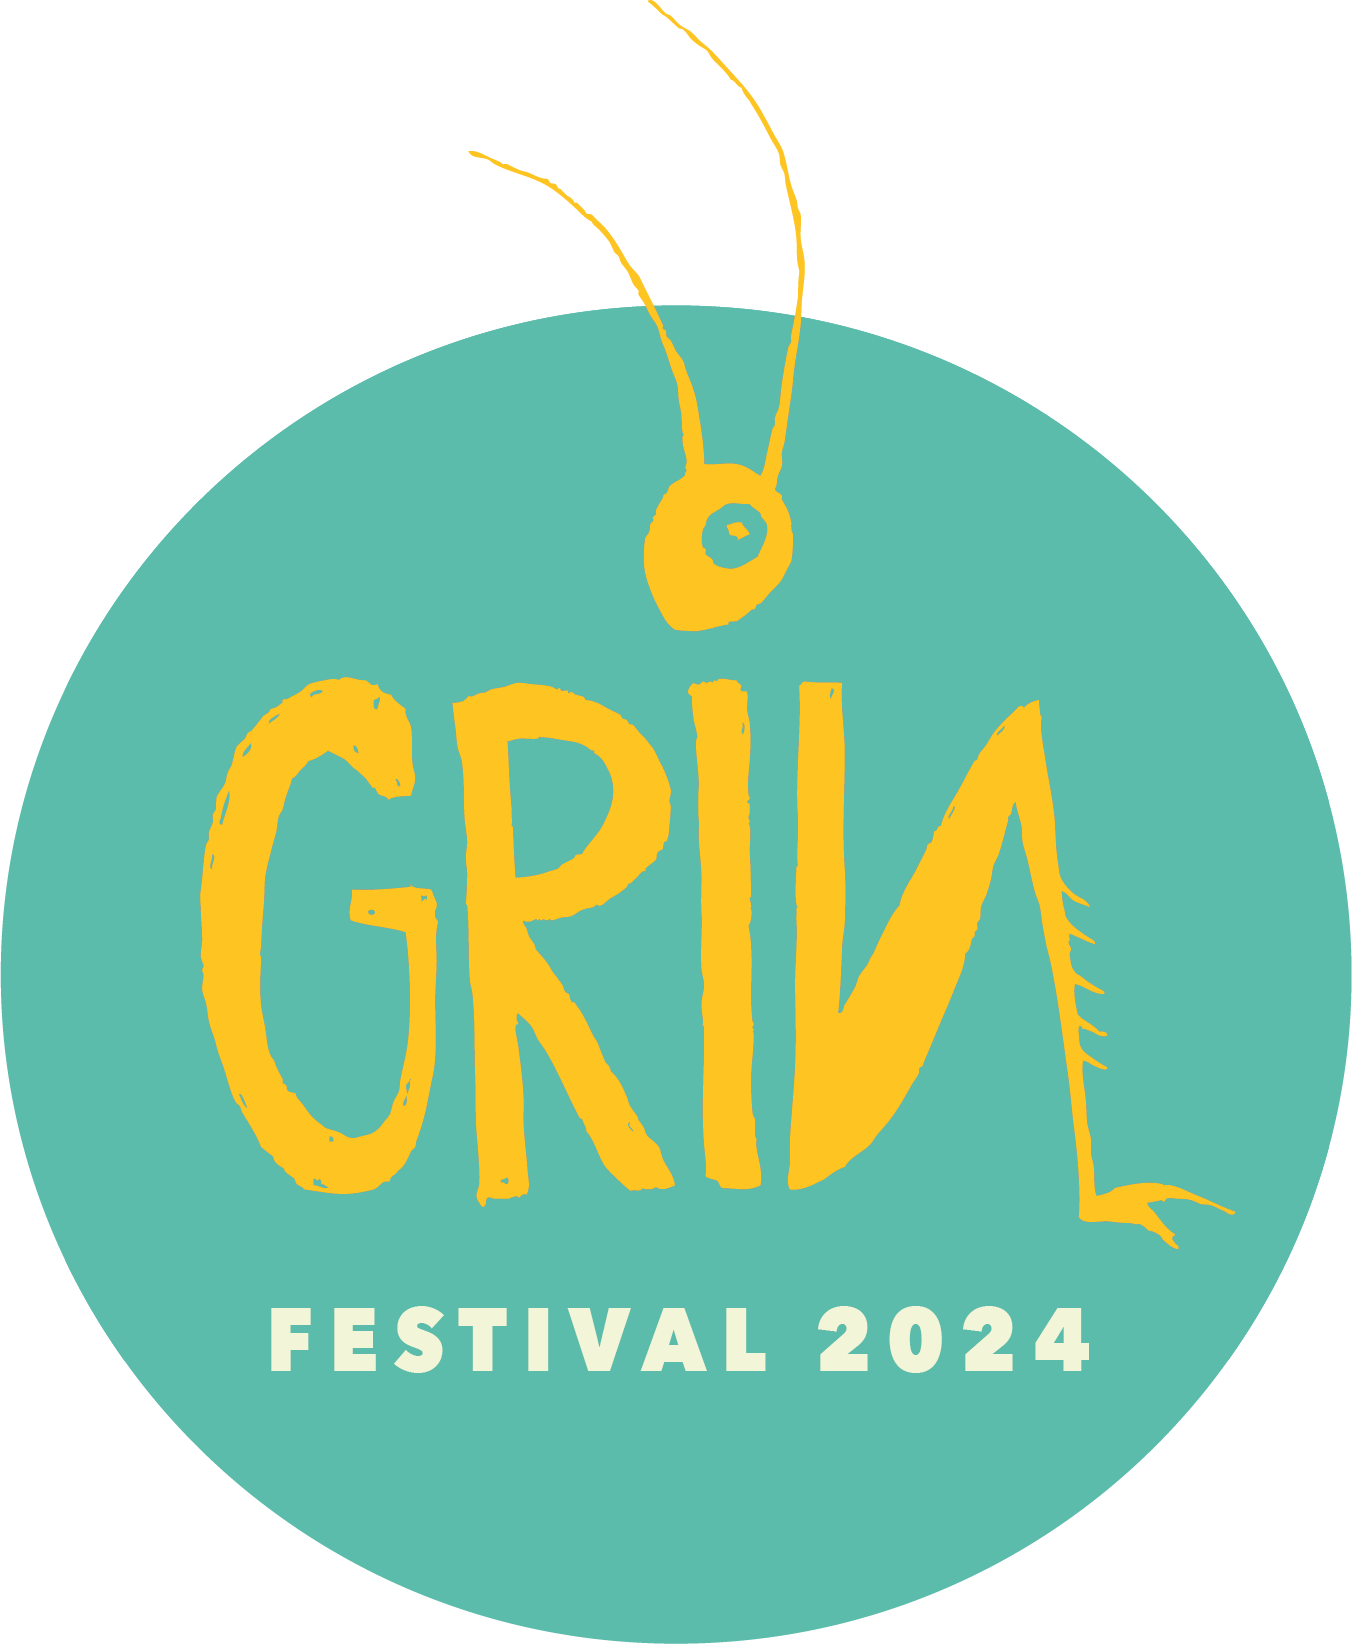 Grinfestival